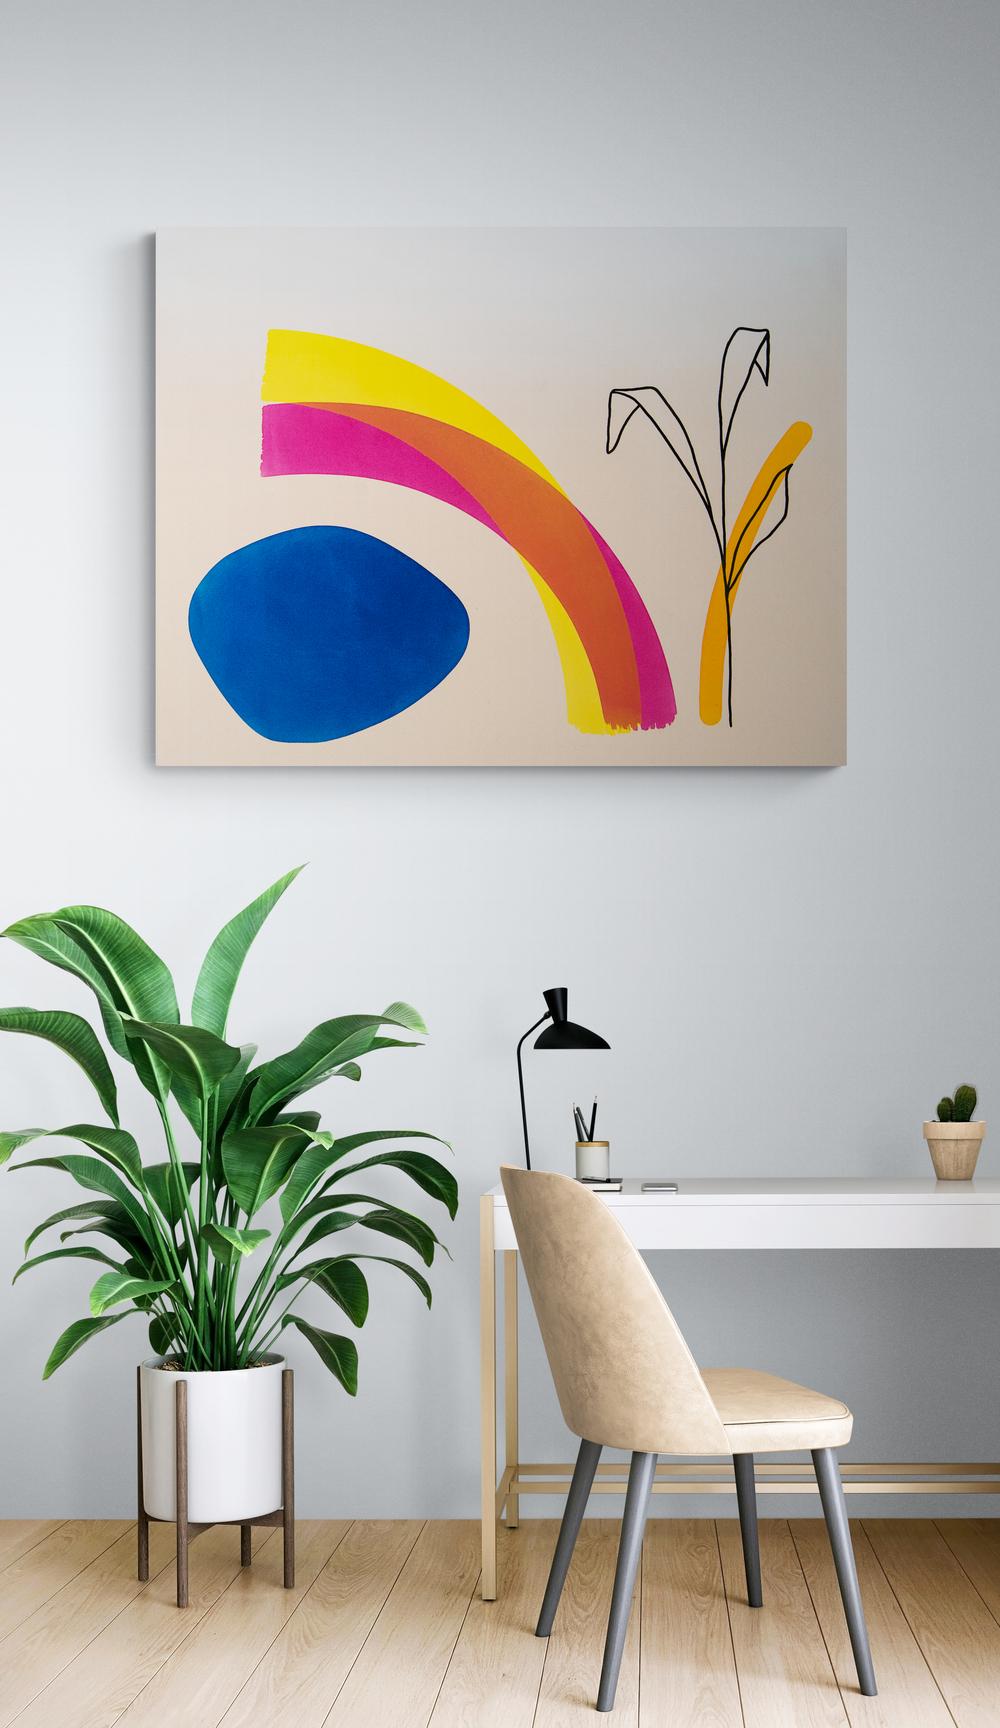 Outline of a Plant - bright, colorful, abstract shapes, acrylic on canvas - Beige Abstract Painting by Aron Hill